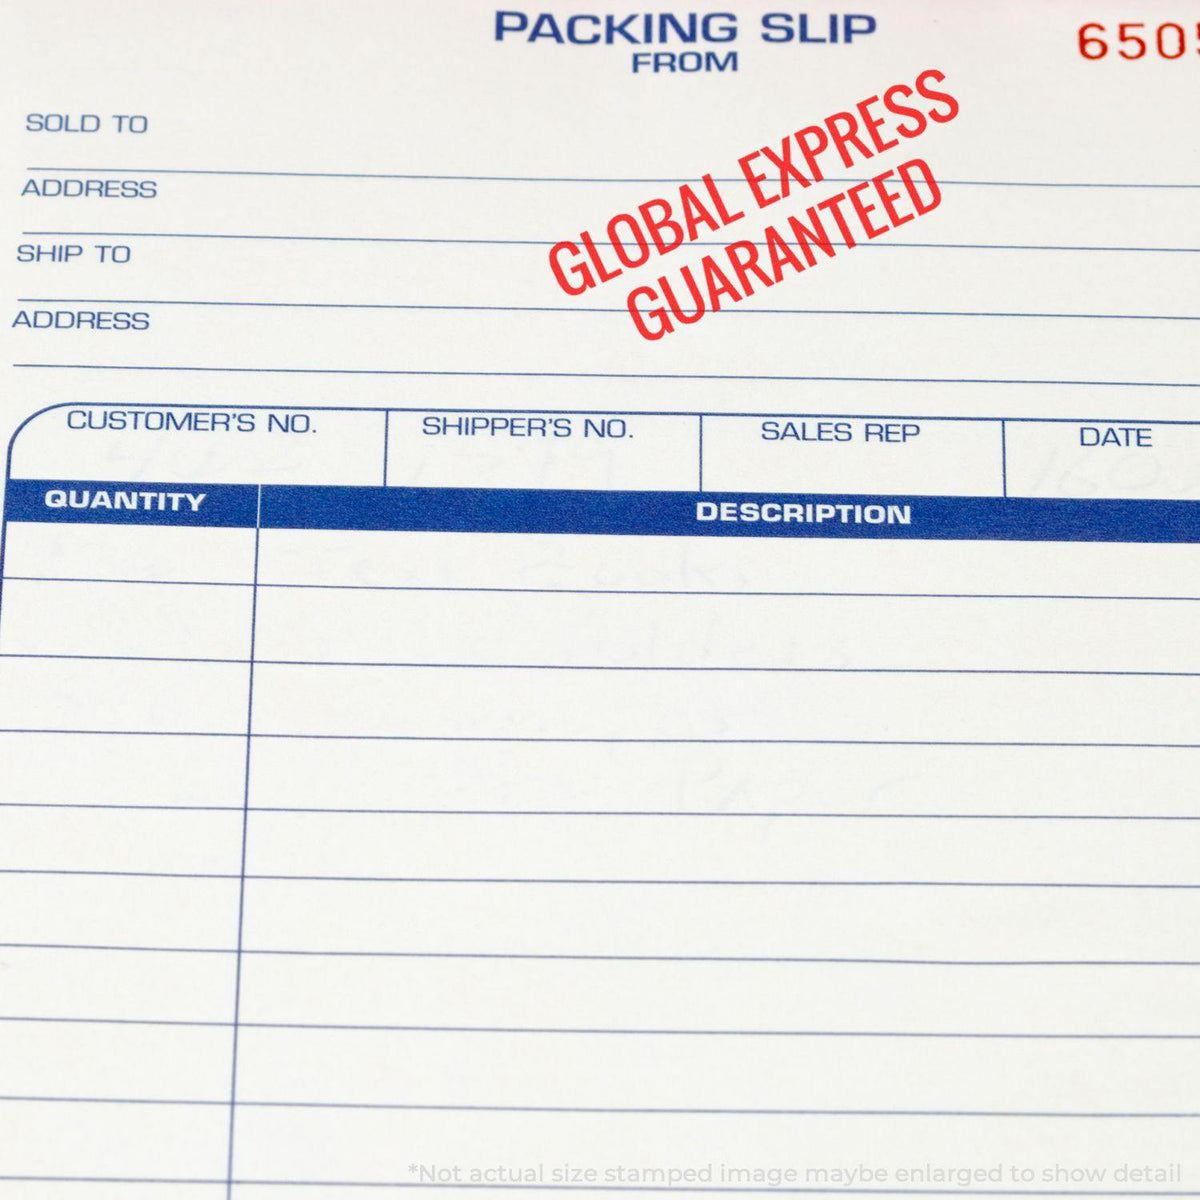 Large Pre-Inked Global Express Guaranteed Stamp Lifestyle Photo